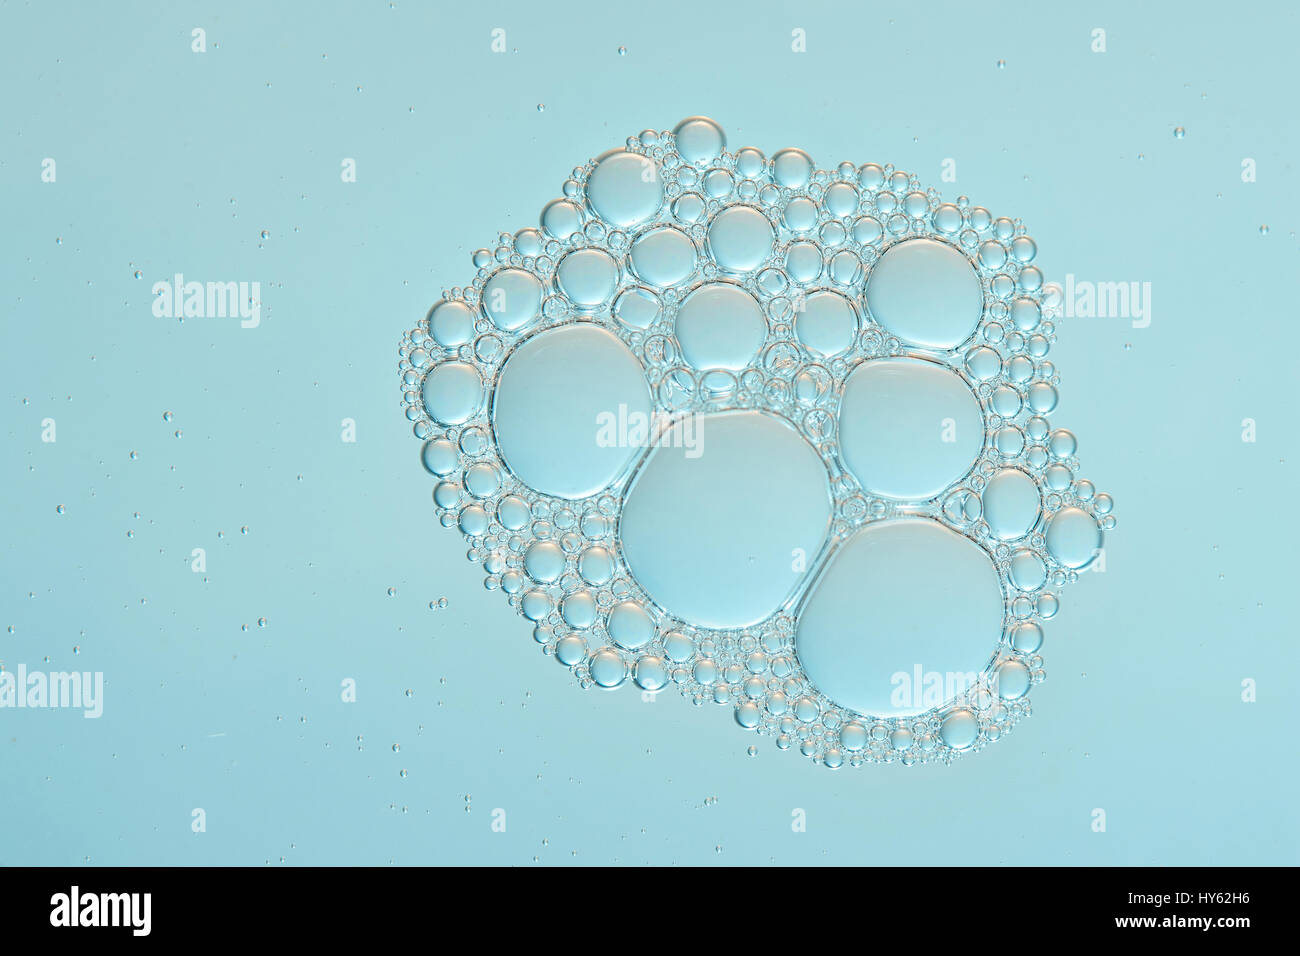 Bubble foam close up on clear water calm surface background Stock Photo